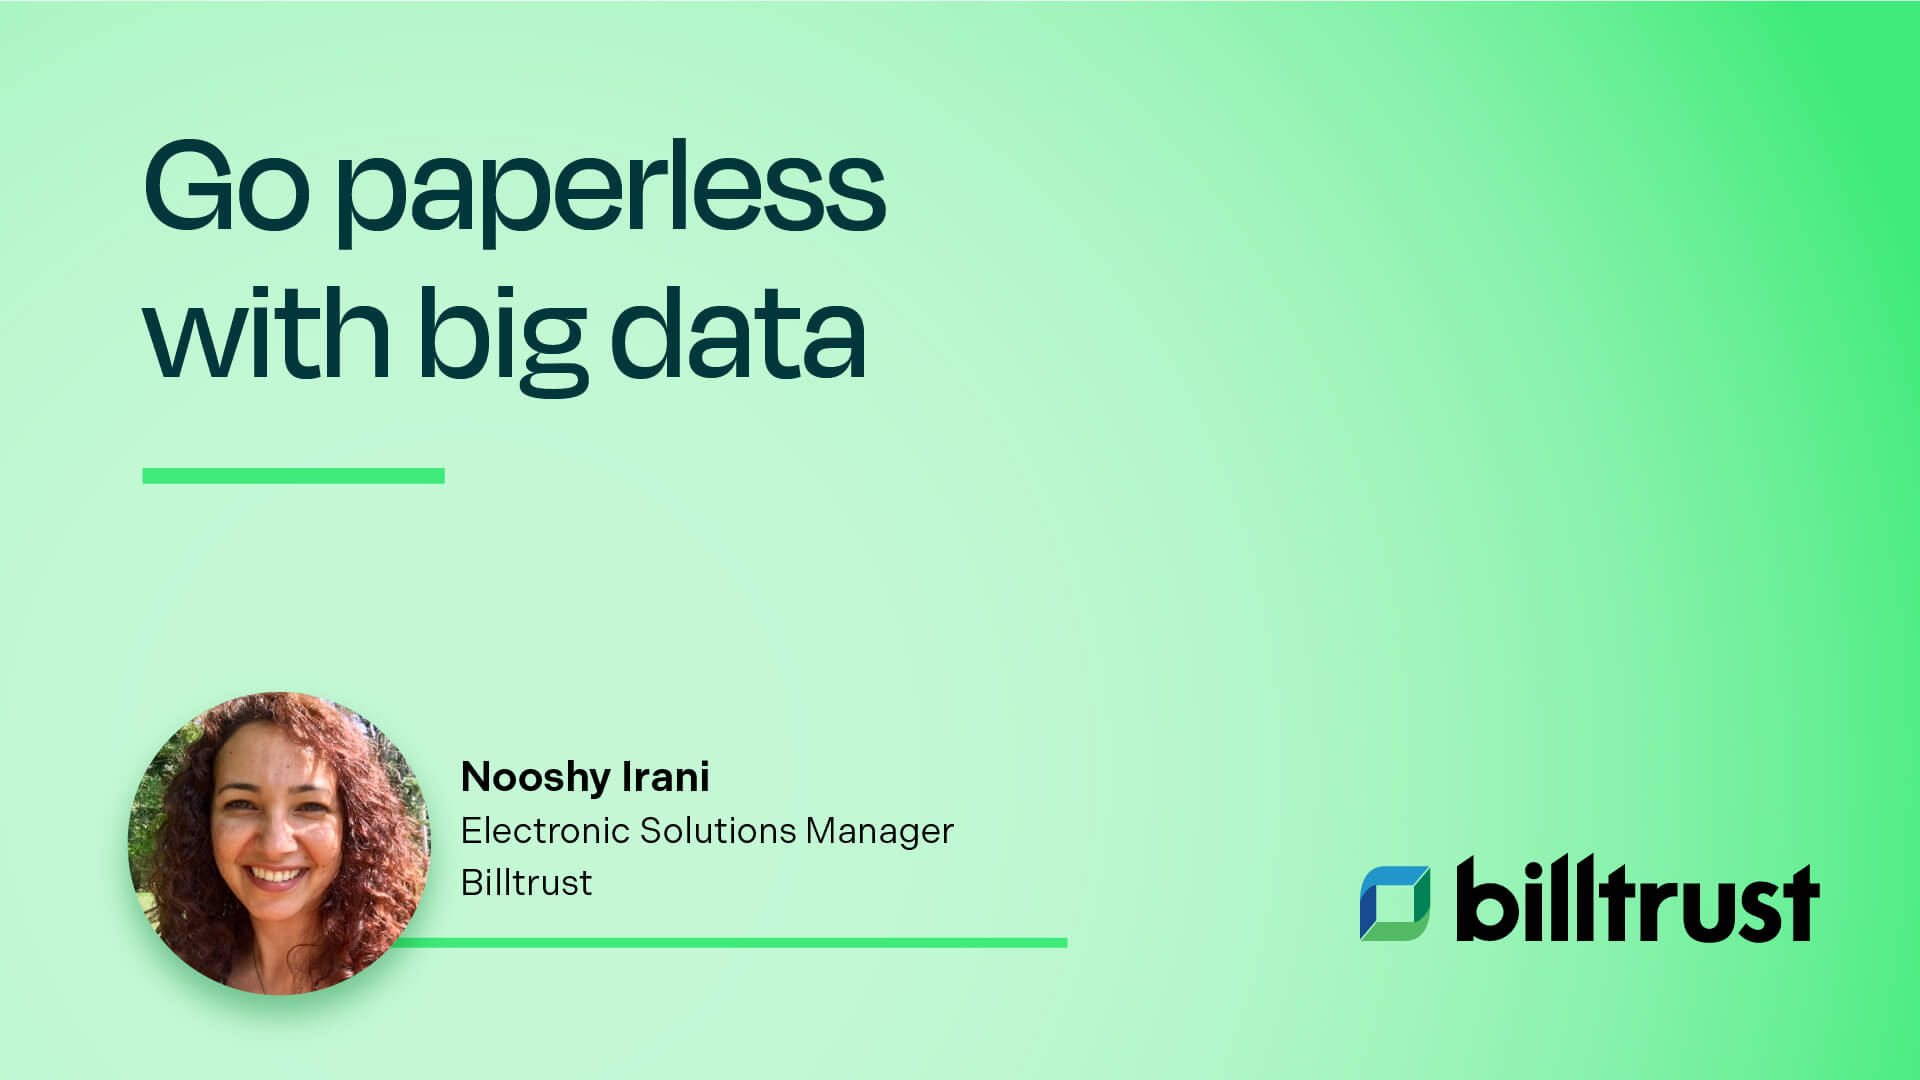 Go paperless with big data video thumbnail